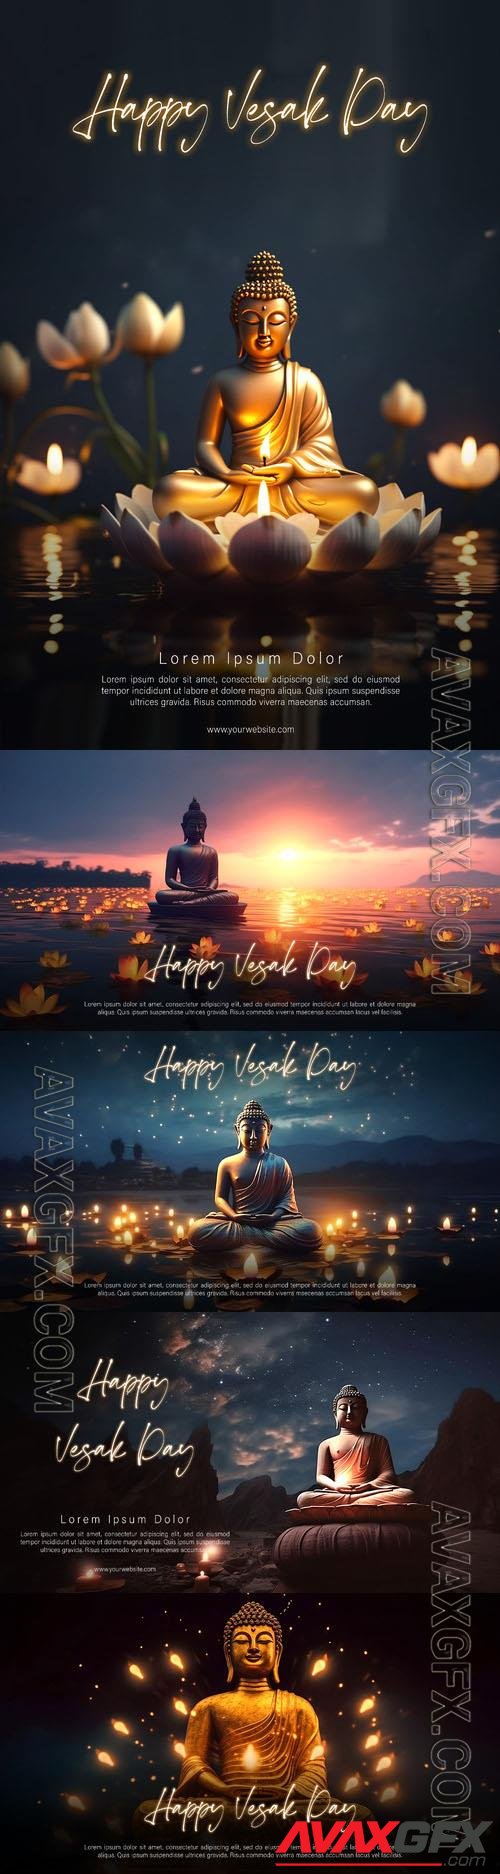 Happy vesak day with a buddha and lotus flower psd poster